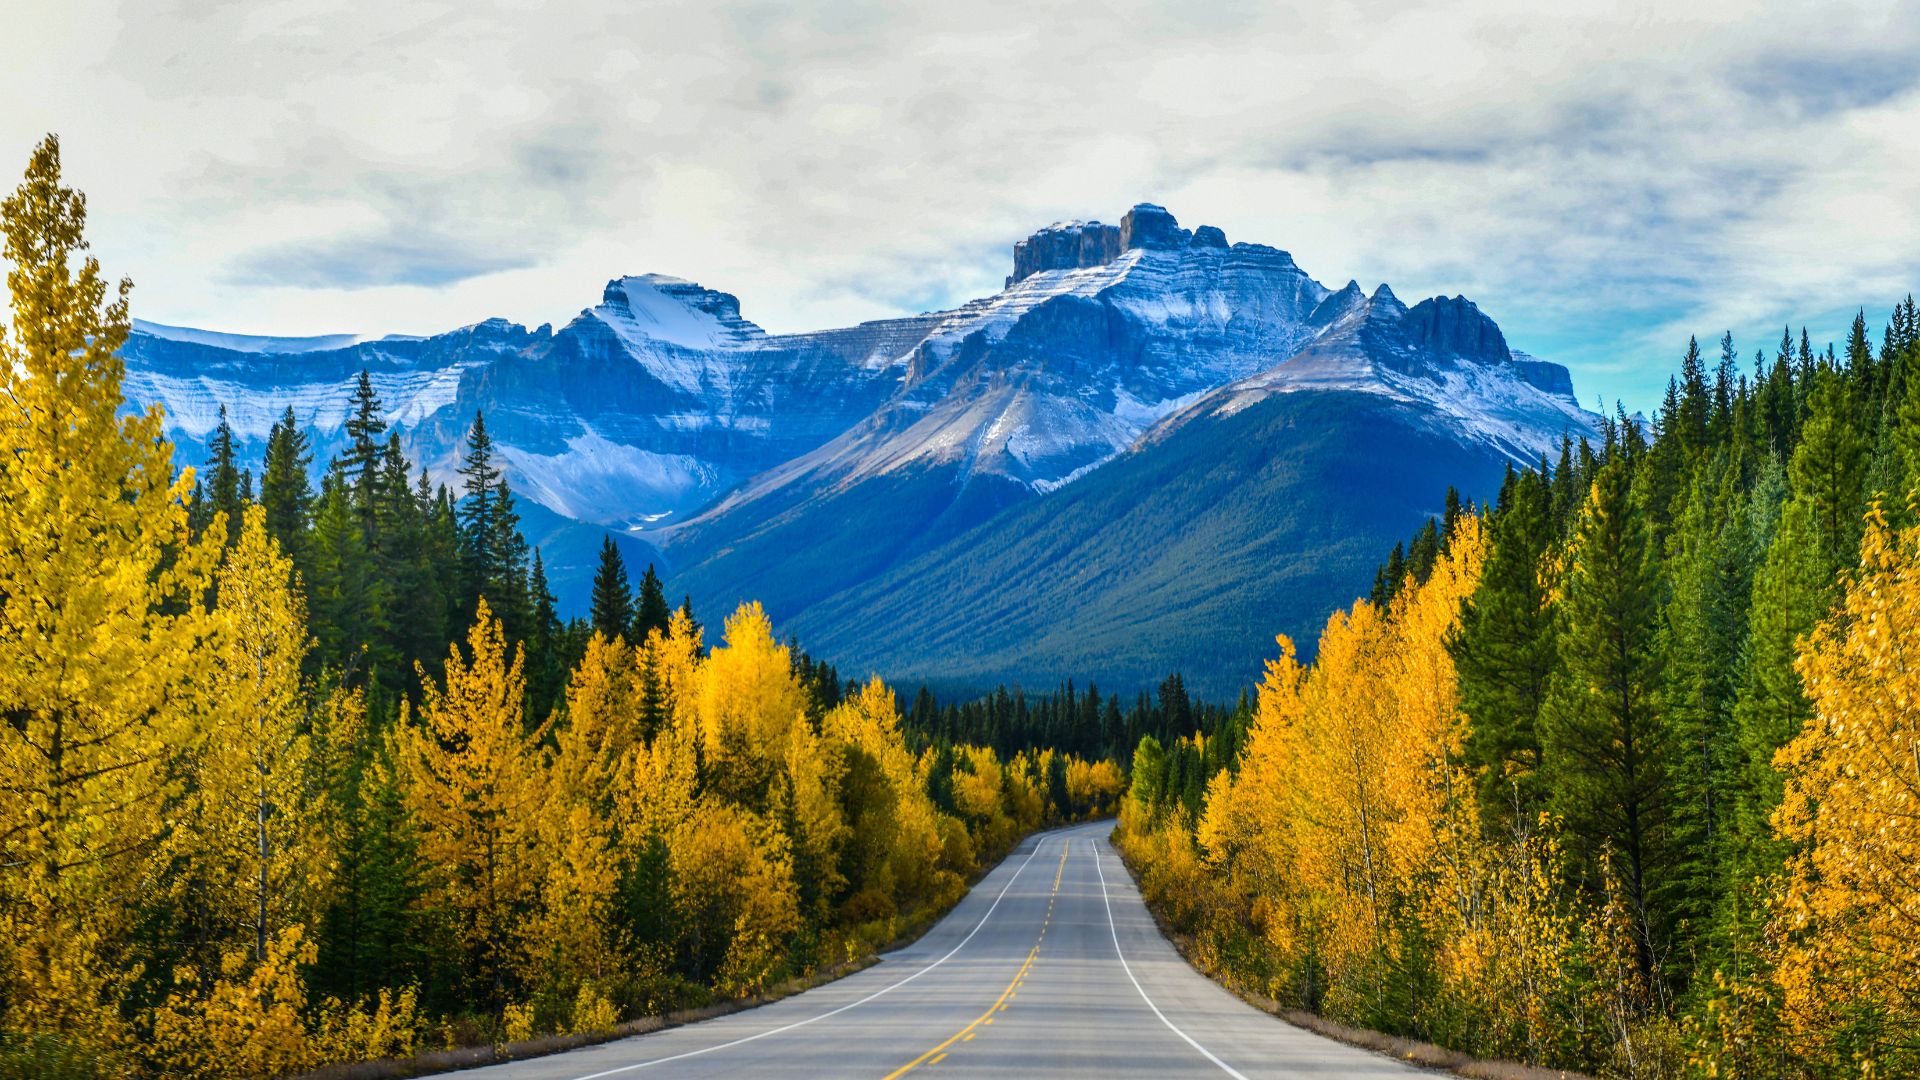 7 Best Places to Stay in Jasper National Park